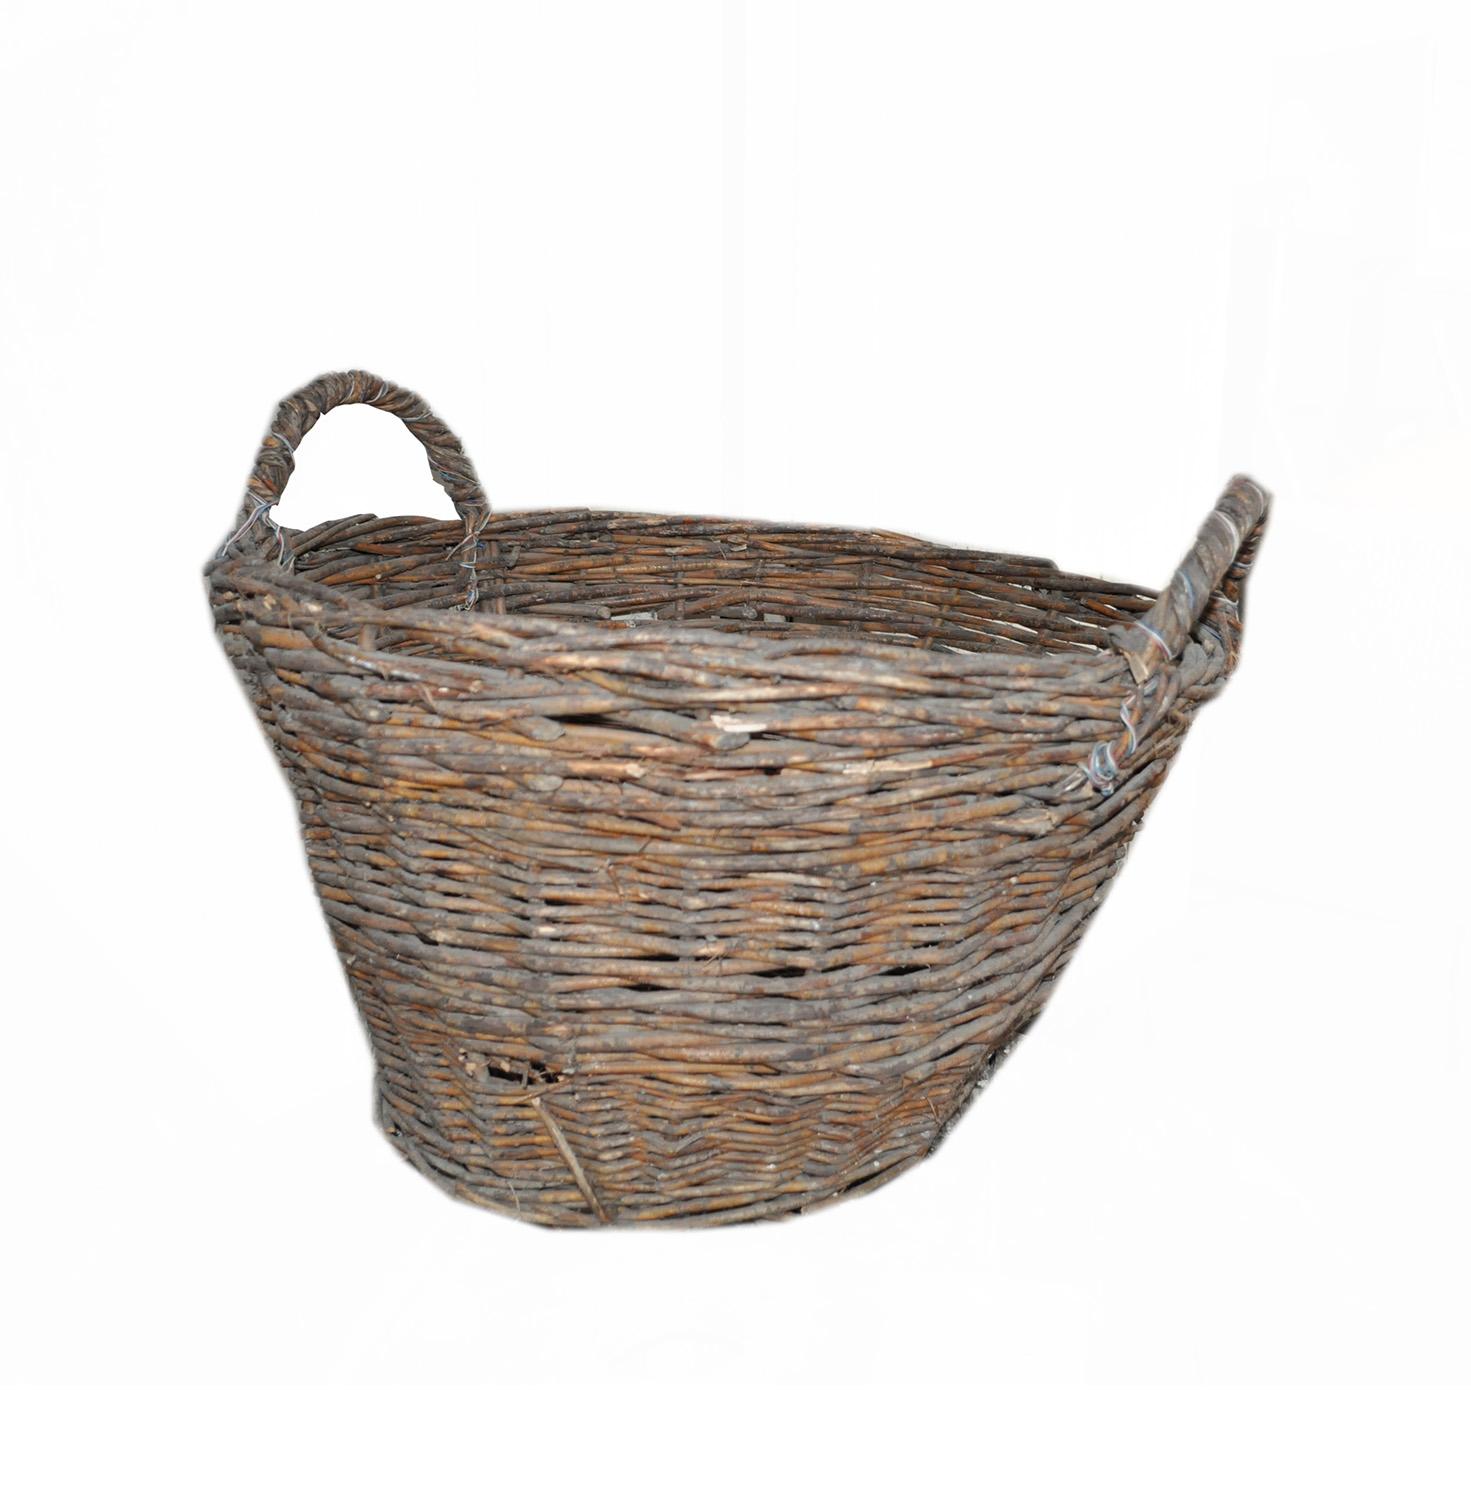 Vintage basket with handles from Hungary.
Large Hungarian vineyard harvest wicker basket.
Handmade and handwoven of a thick wicker in superb condition and a lovely warm patina.
Great as a decorative item by the door to hold umbrellas or shopping